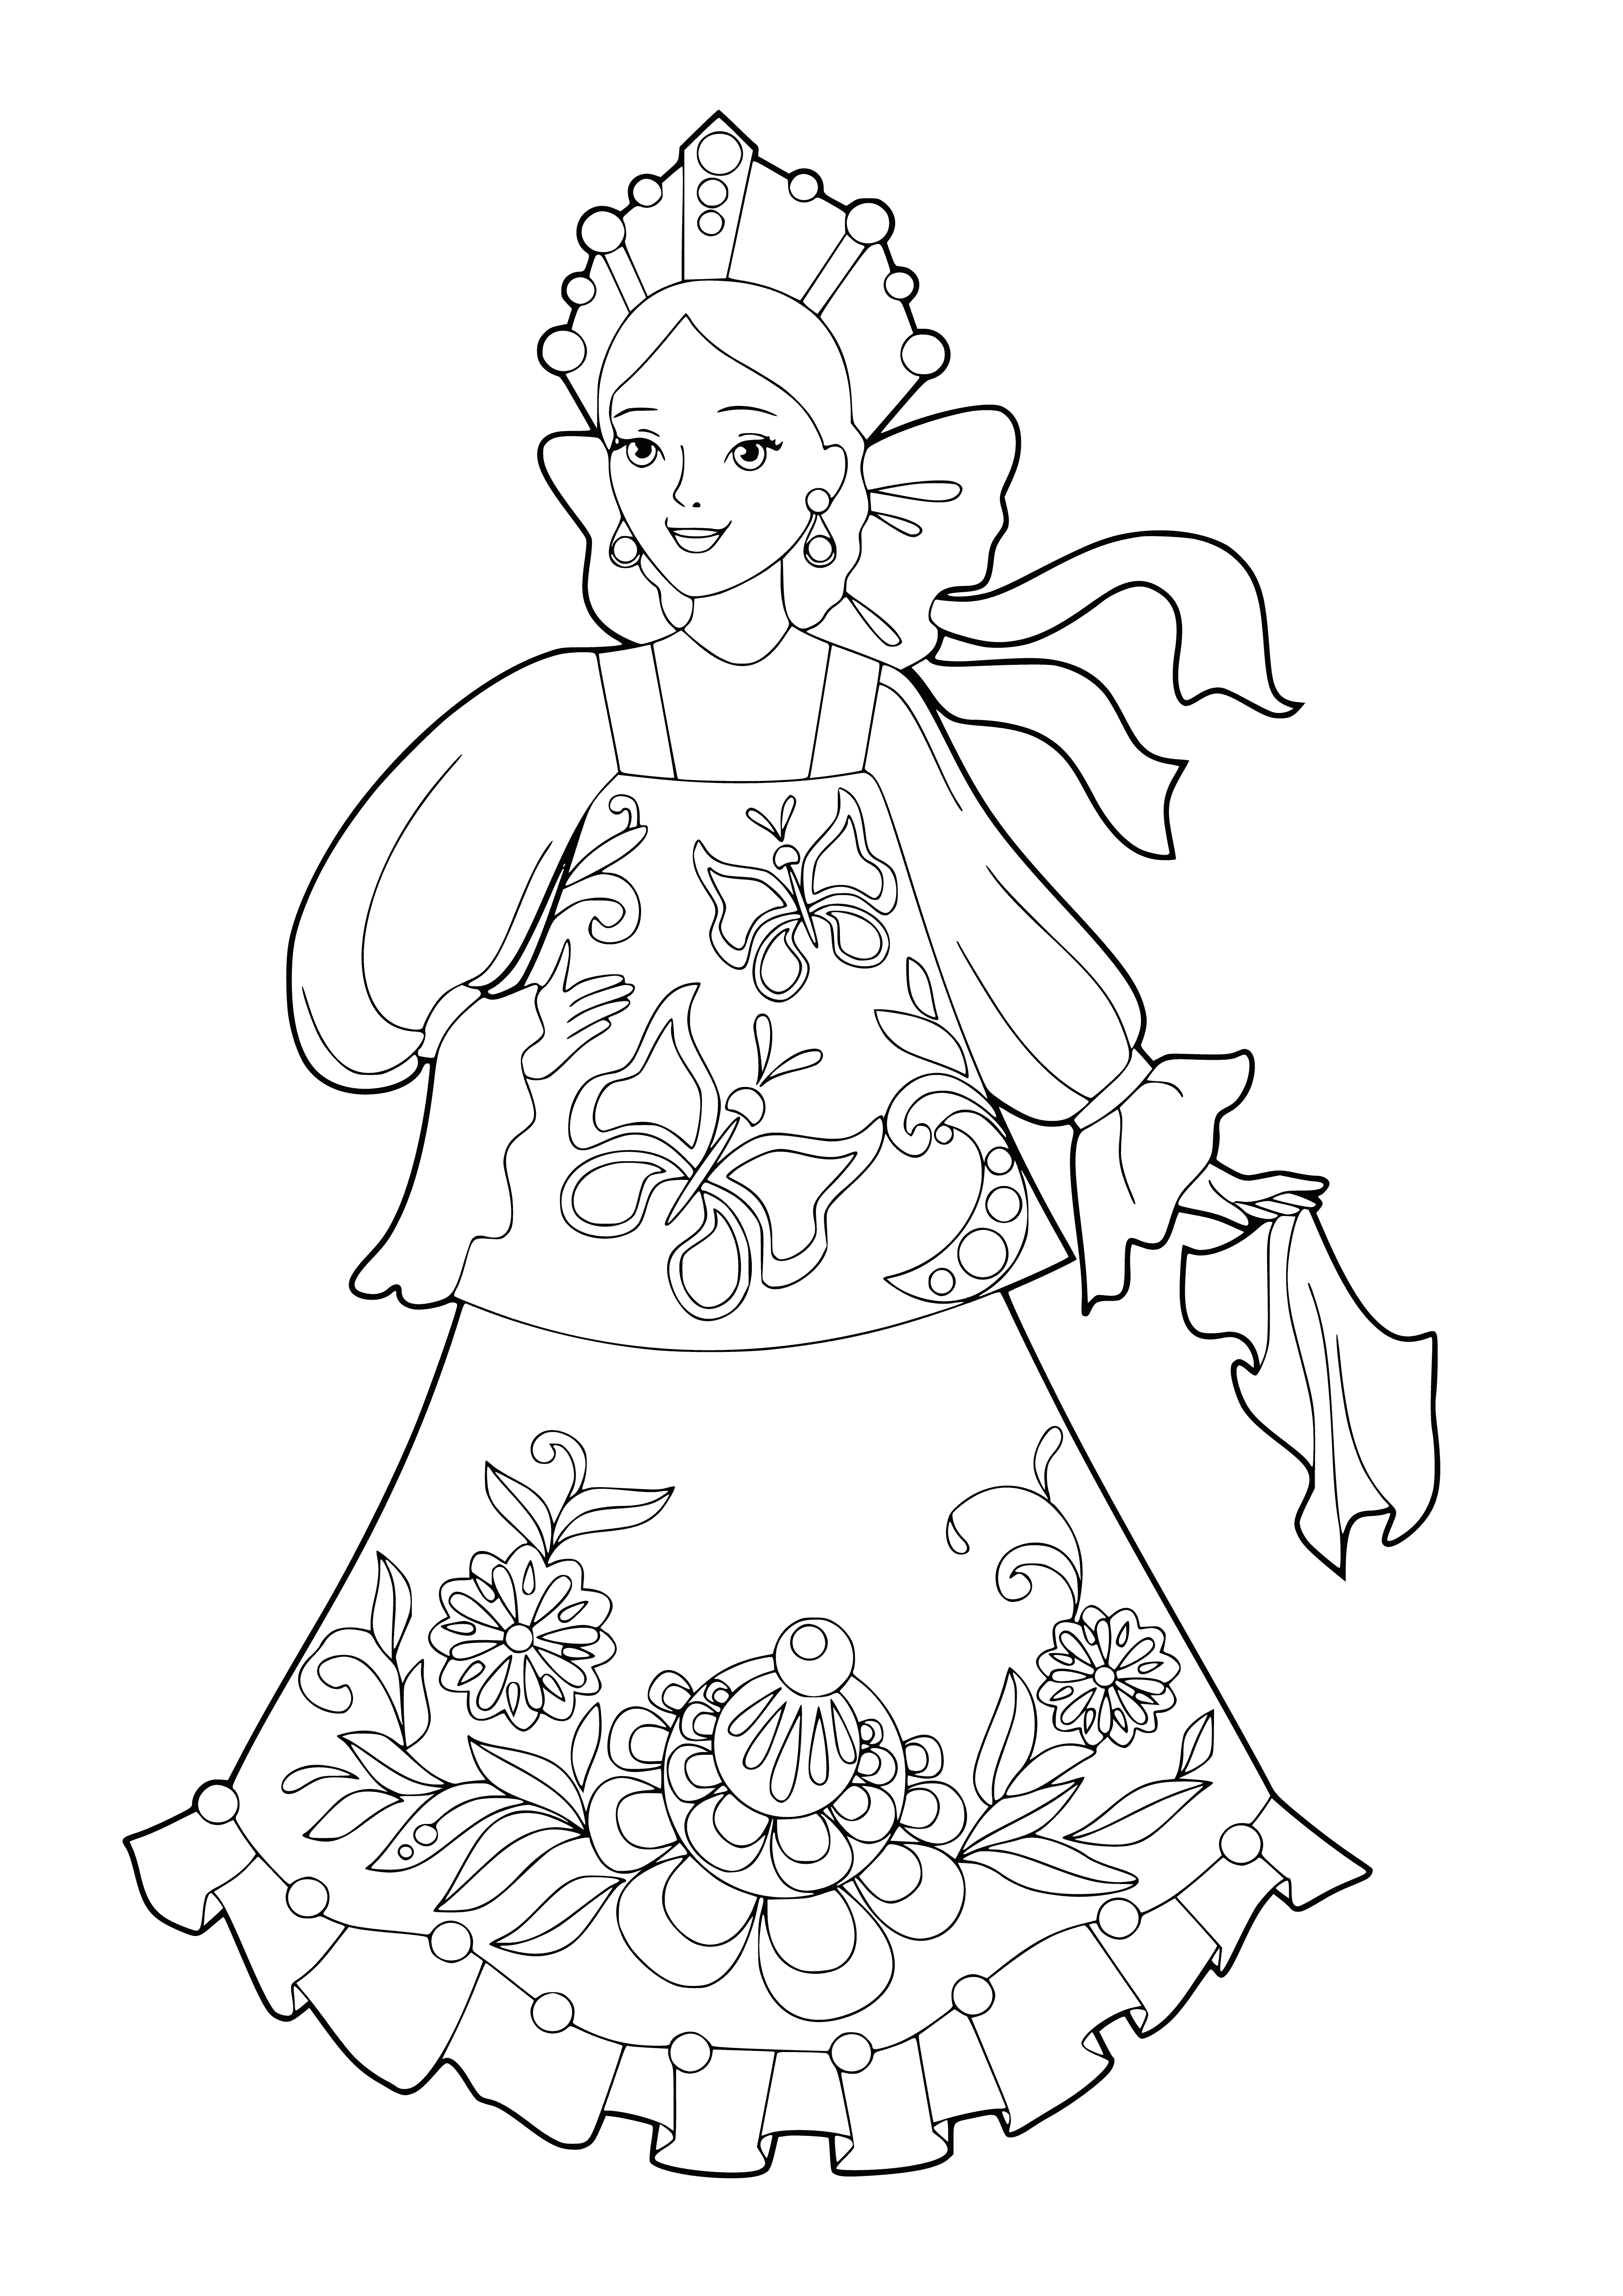 coloring page: Girl in Russian dress stands in sunlight with a red rose, wearing a white dress and blue scarf.